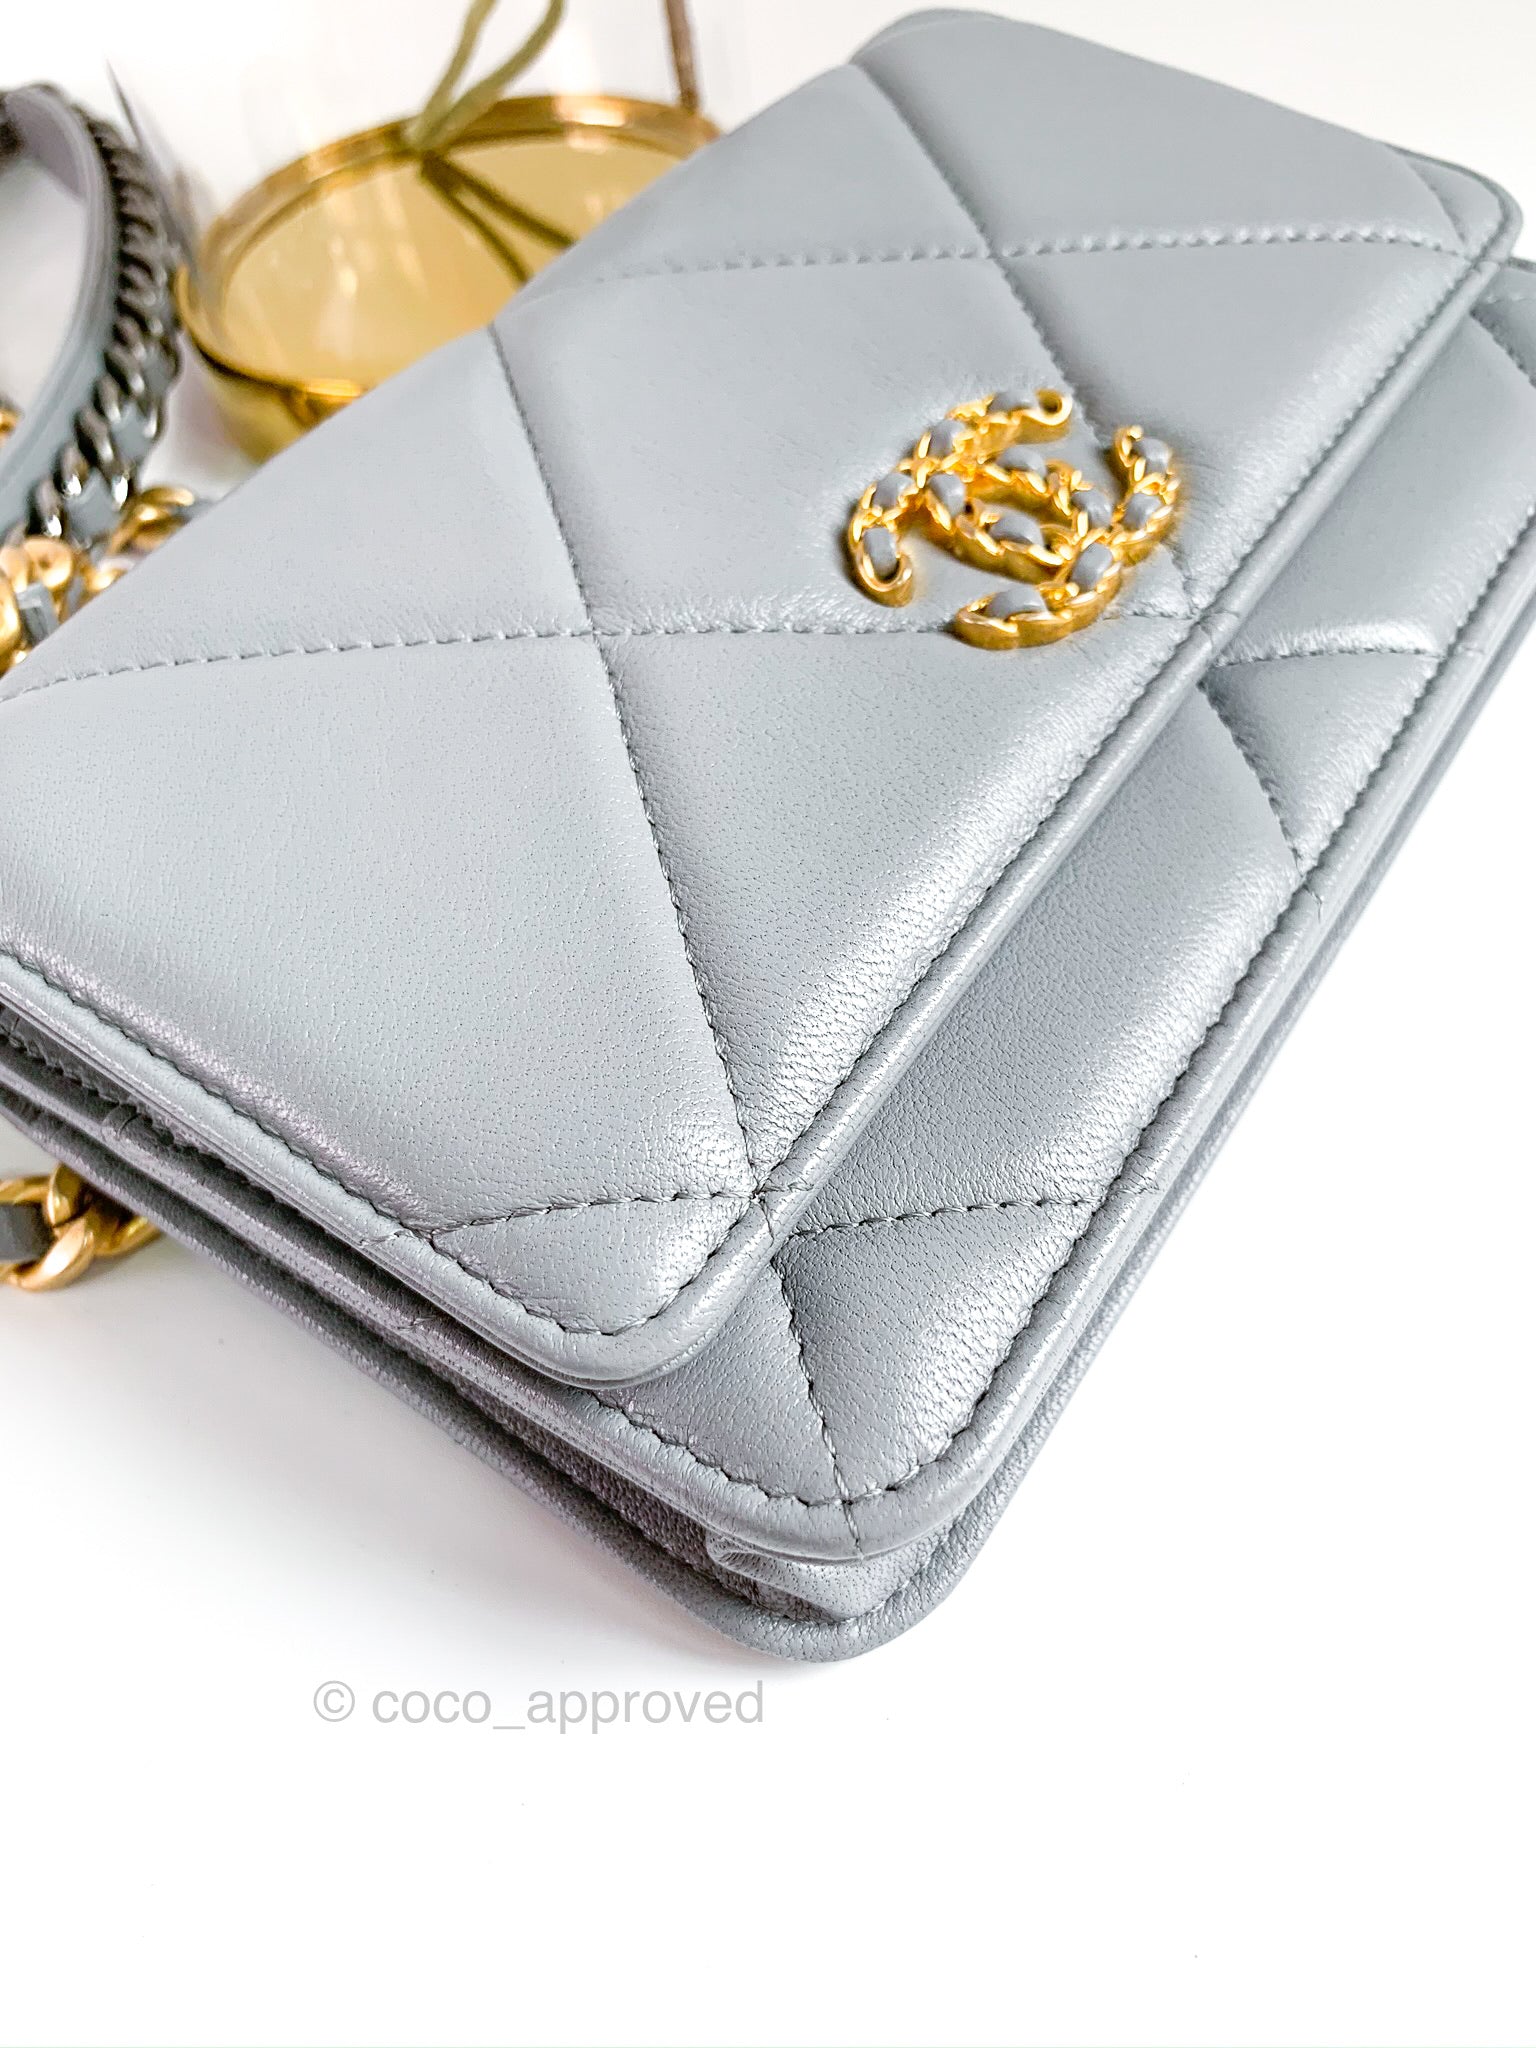 Chanel CHANEL 19 Shiny Lambskin Zip-Around Coin Purse with Gold Hardware  (Wallets and Small Leather Goods,Wallets)